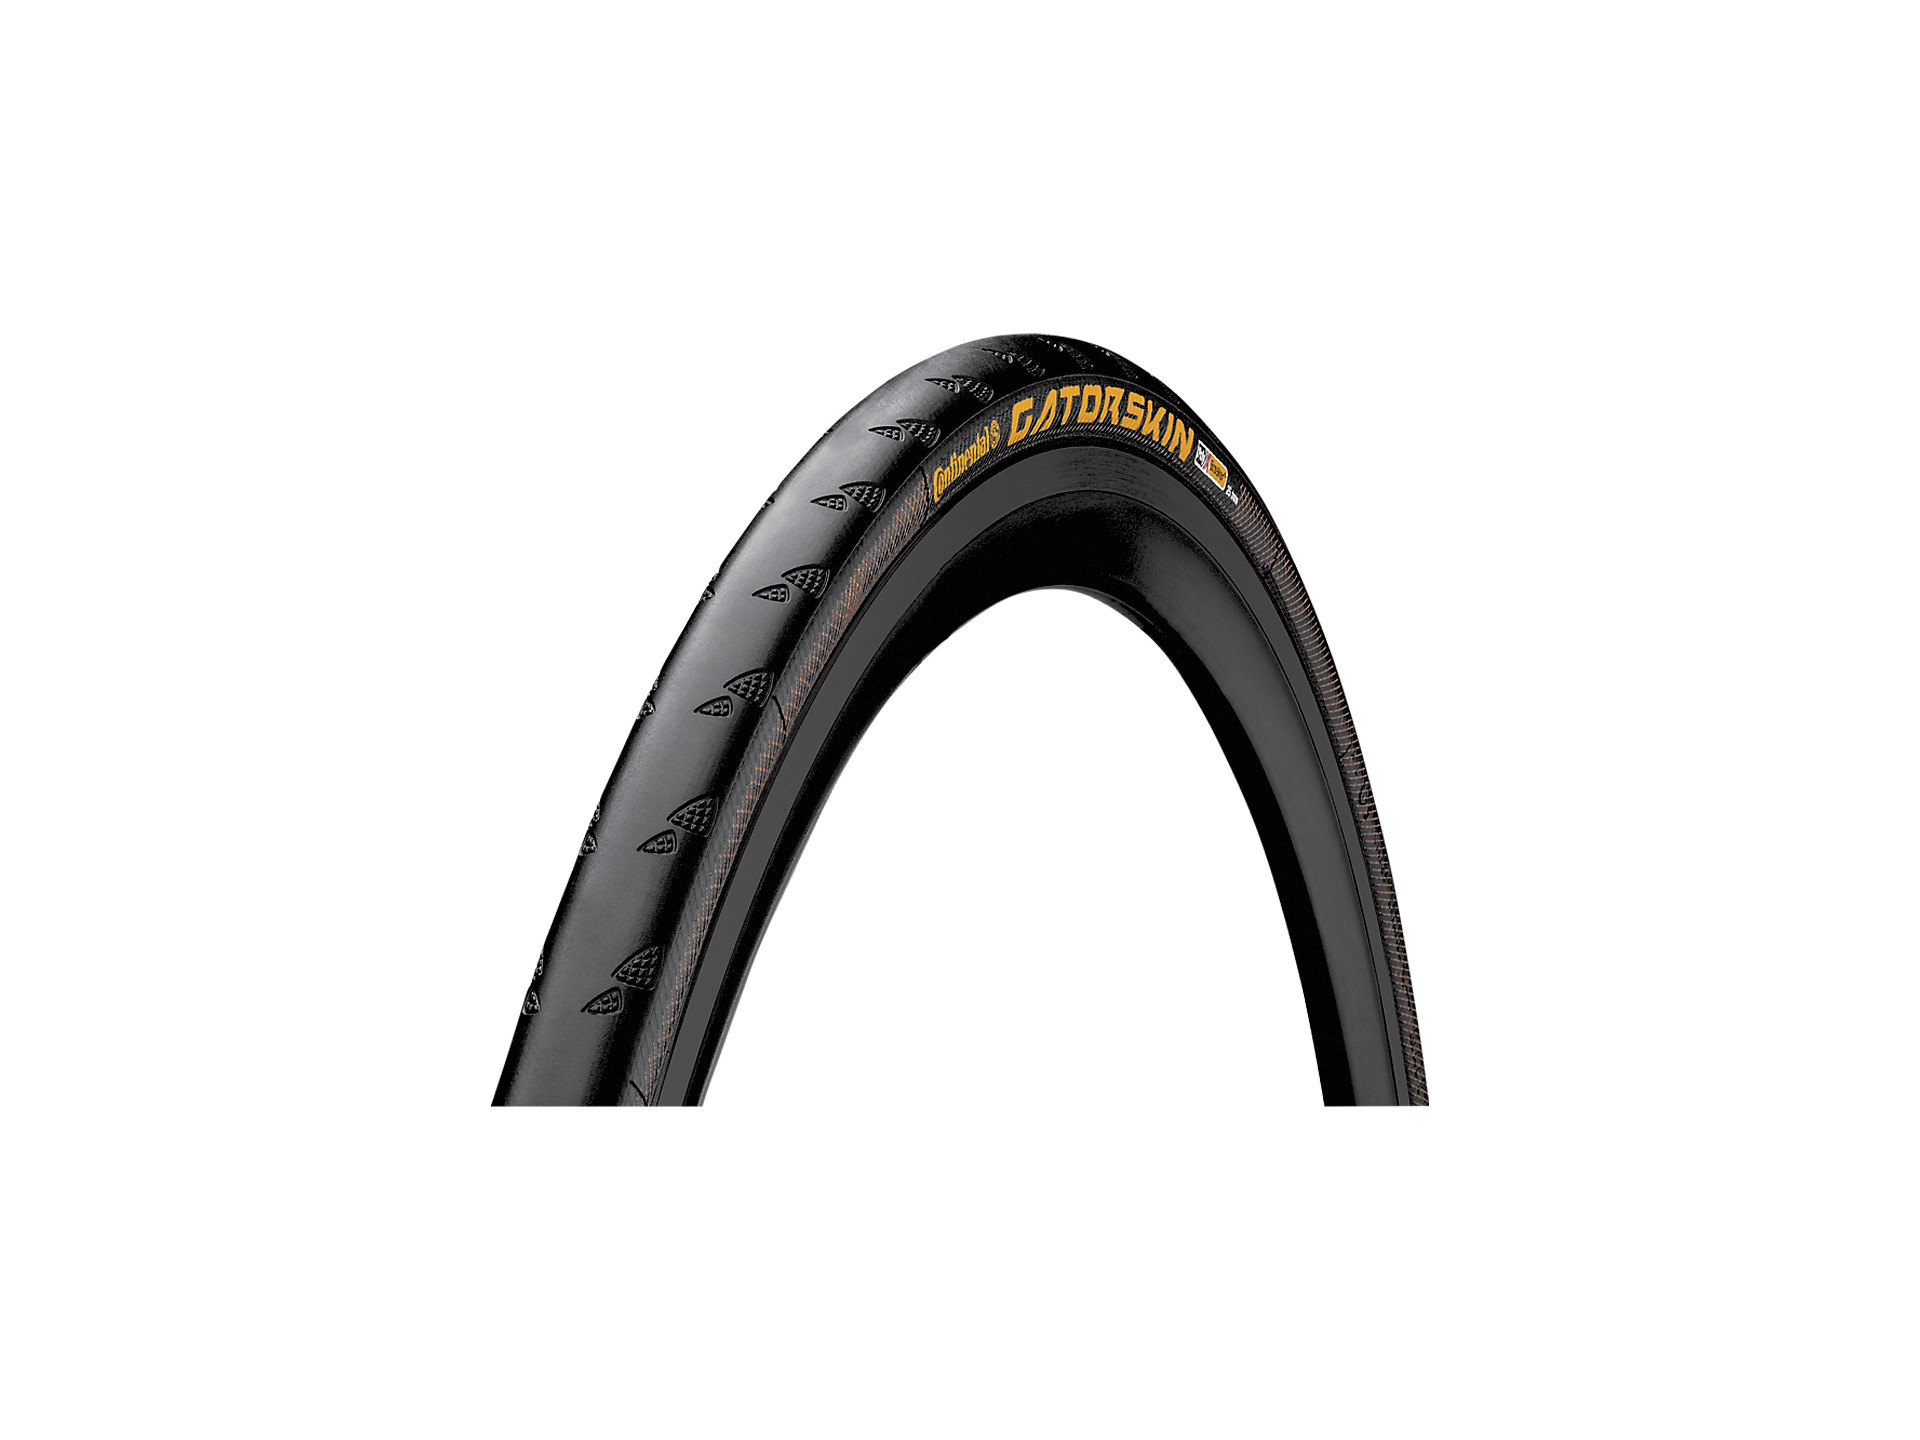 Pair of Folding Road Cycle Tyres 700x23c New Bike Racing tyres Various Colours 